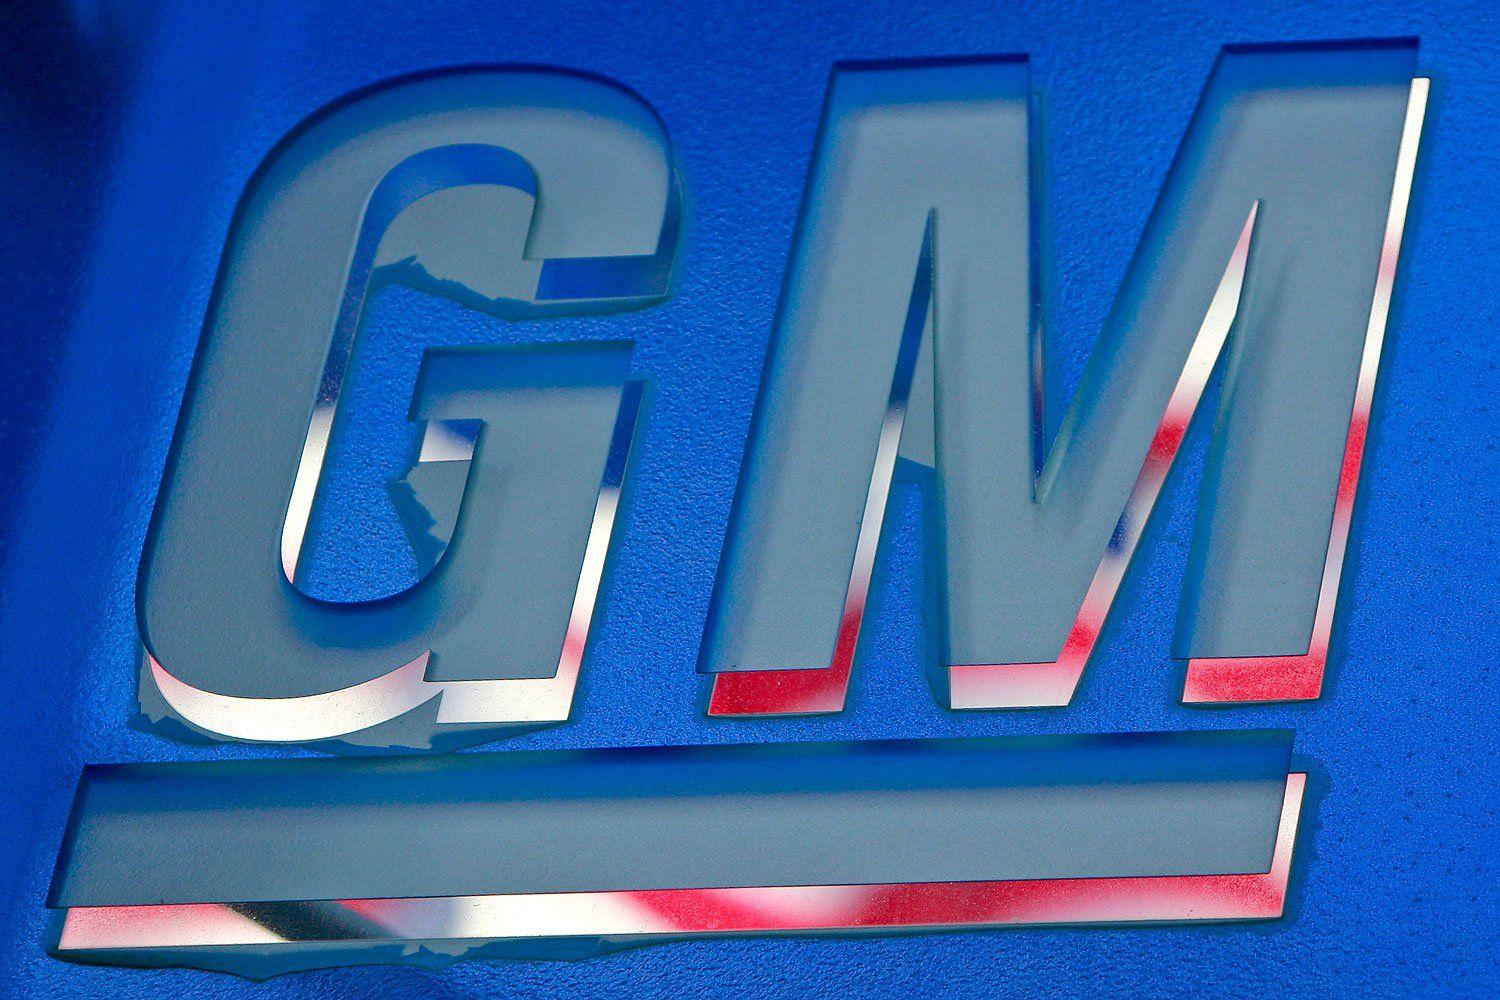 Gm Logos Over The Years